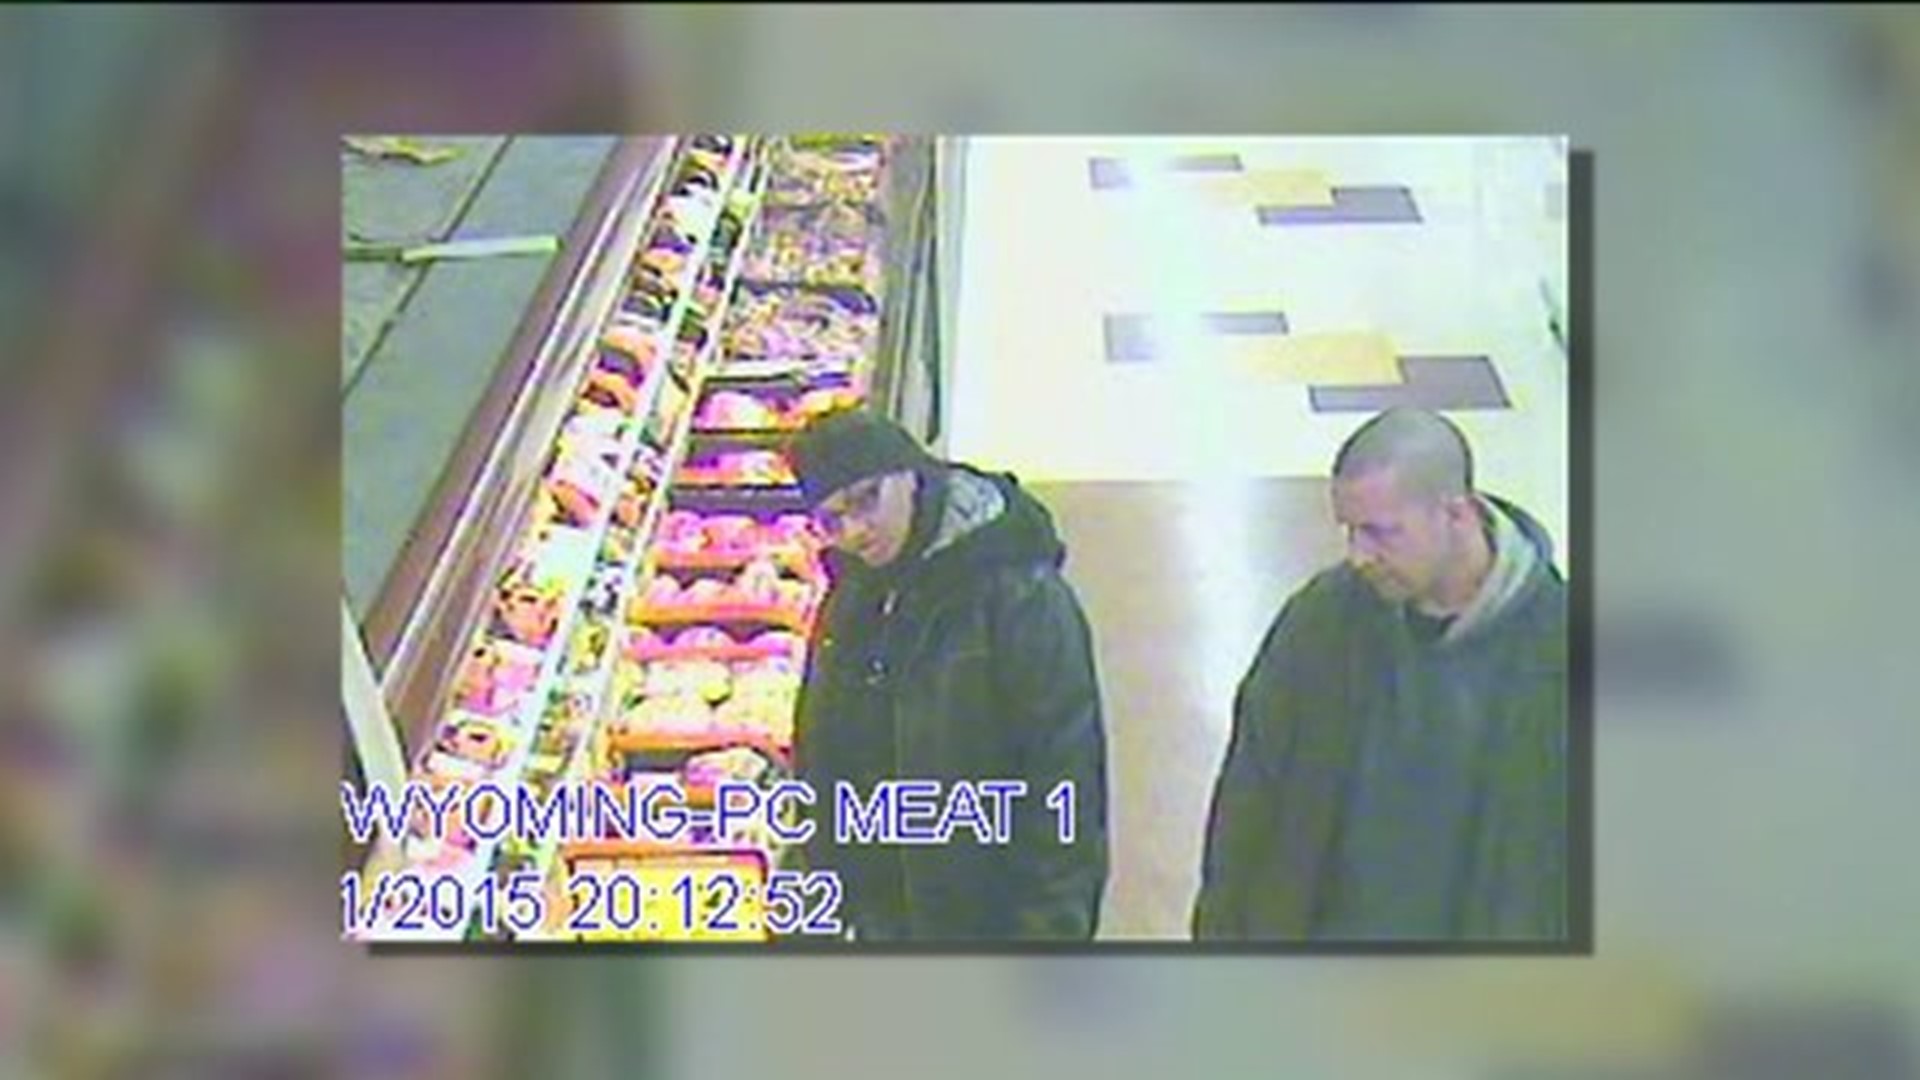 Police Investigating Meat Theft in Luzerne County